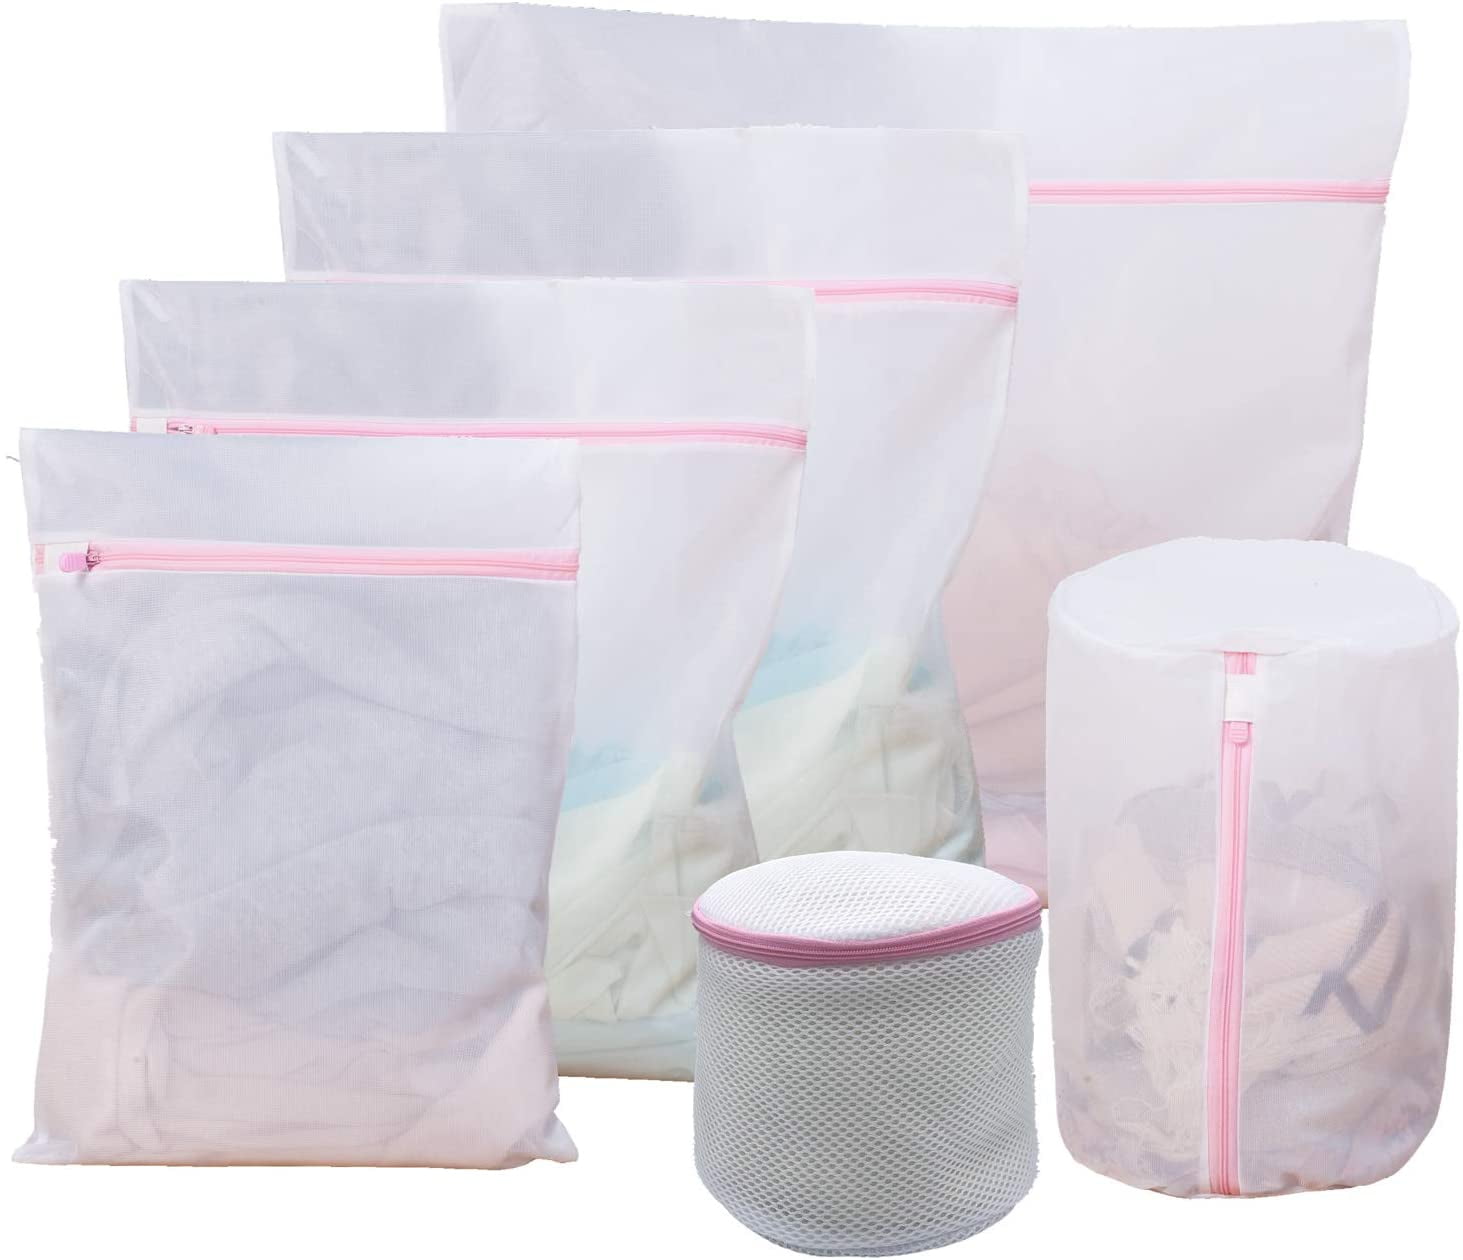 Breathable Wash With Colored Zippers Set Of 5 Mesh Laundry Bag Delicates Bags 